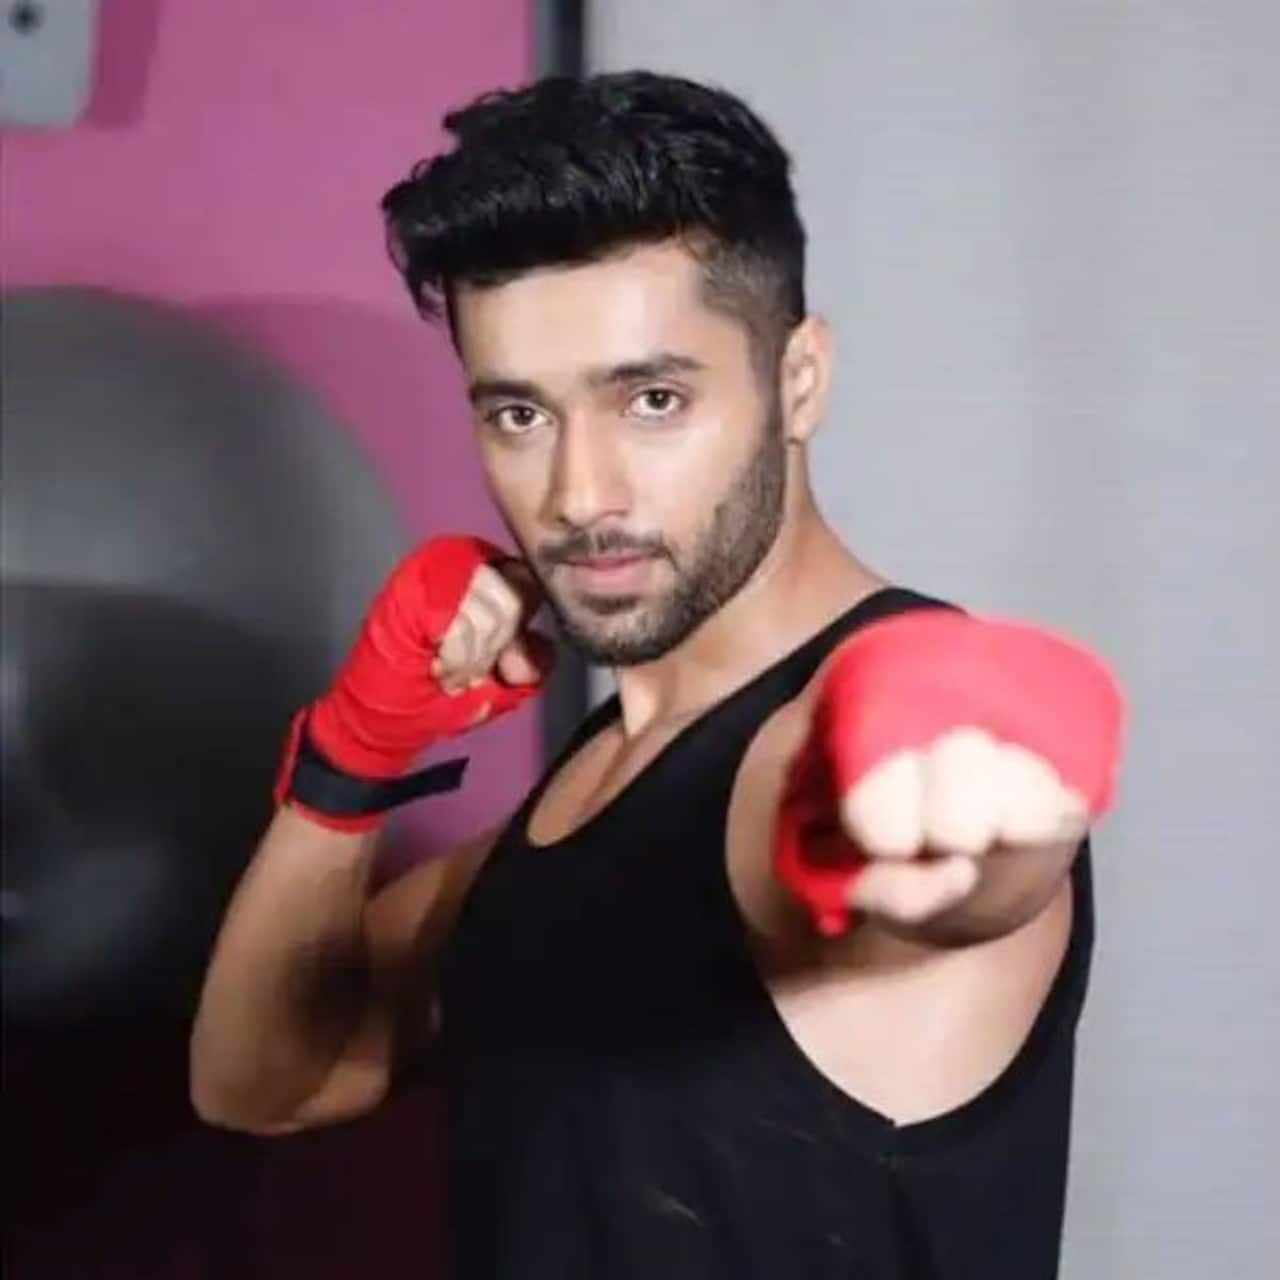 Utkarsh Sharma is all grown-up and muscular